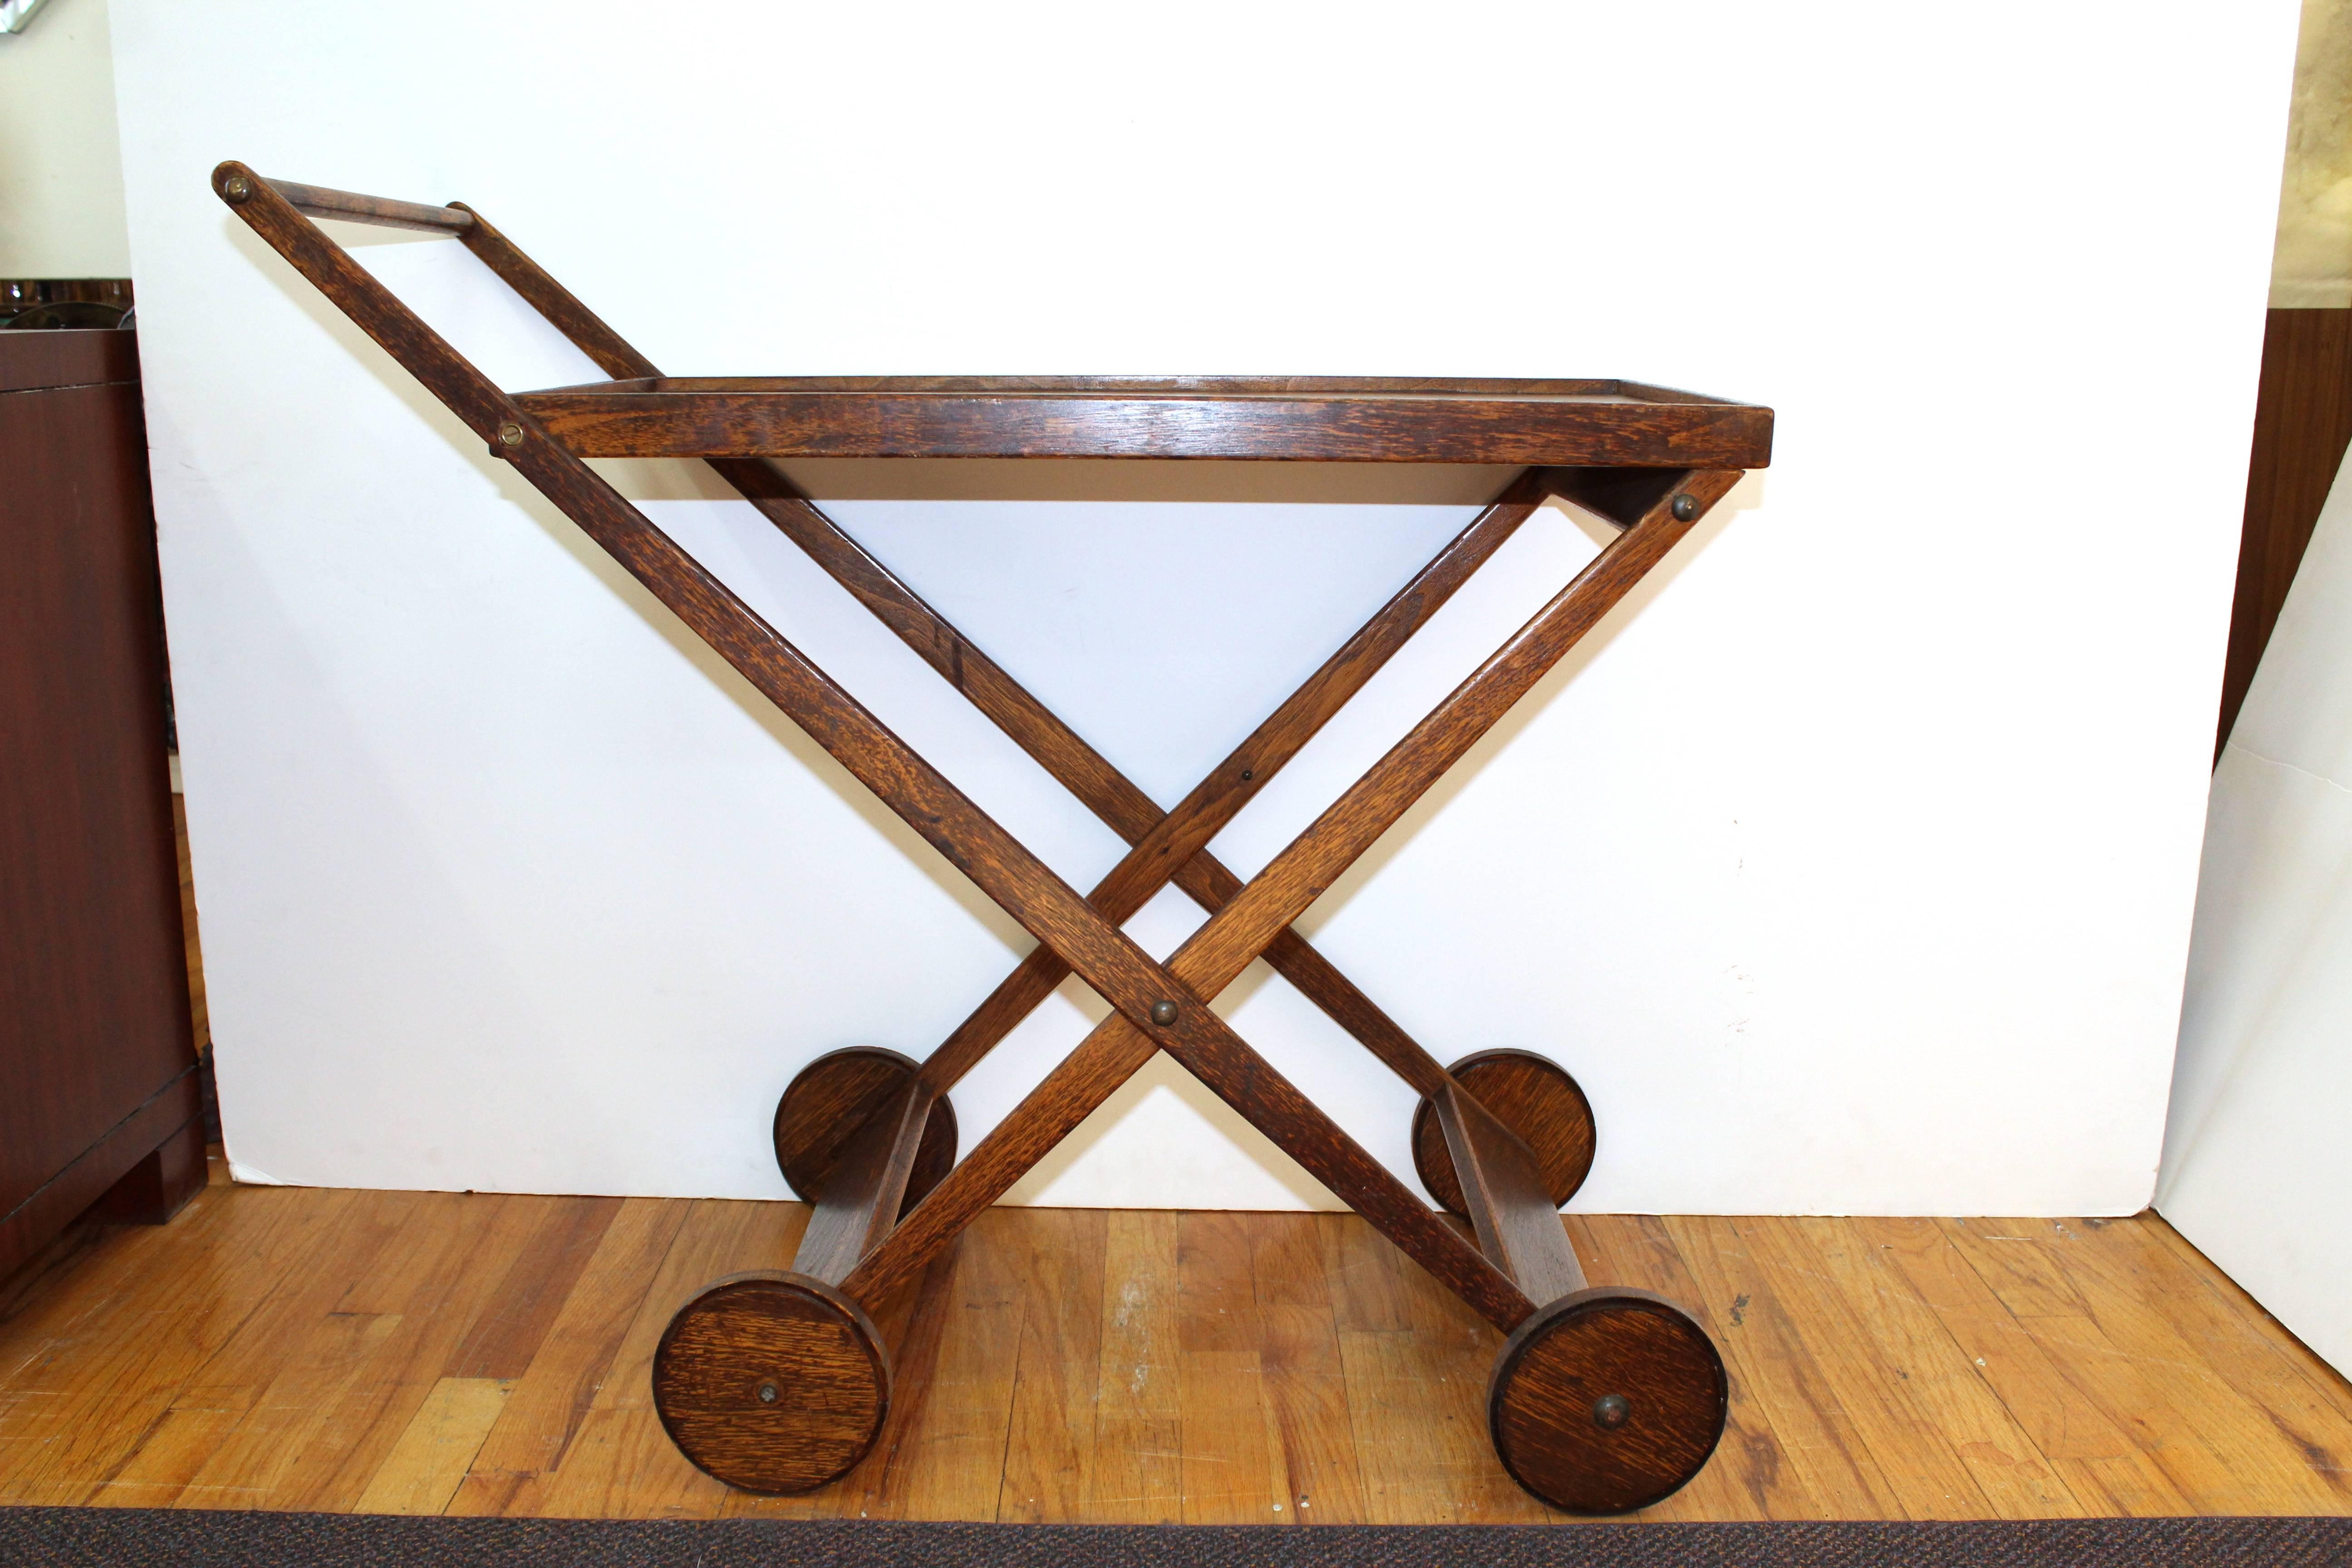 A simple and elegant bar cart by Dennett and Fetz, produced in wood. Makers mark on bottom with some signs of wear appropriate to age and use. 

110437.